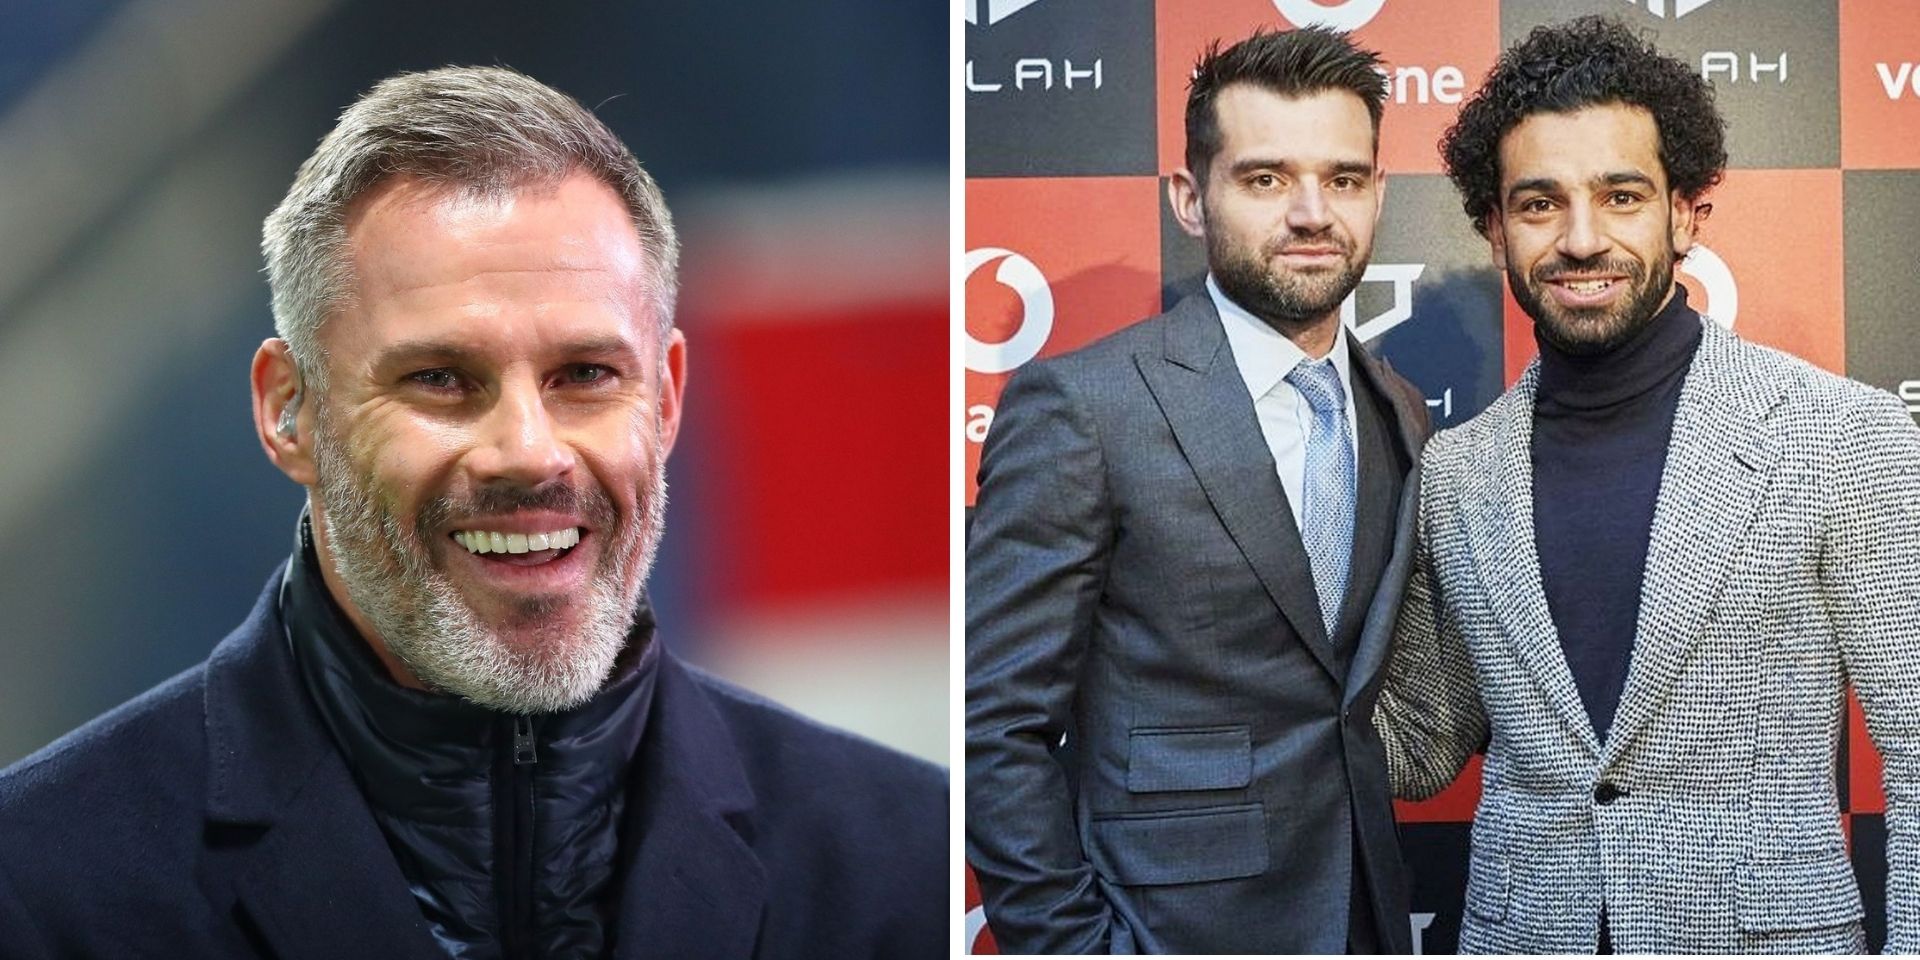 Jamie Carragher’s playful response to Mo Salah’s agent as his new contract is announced by Liverpool